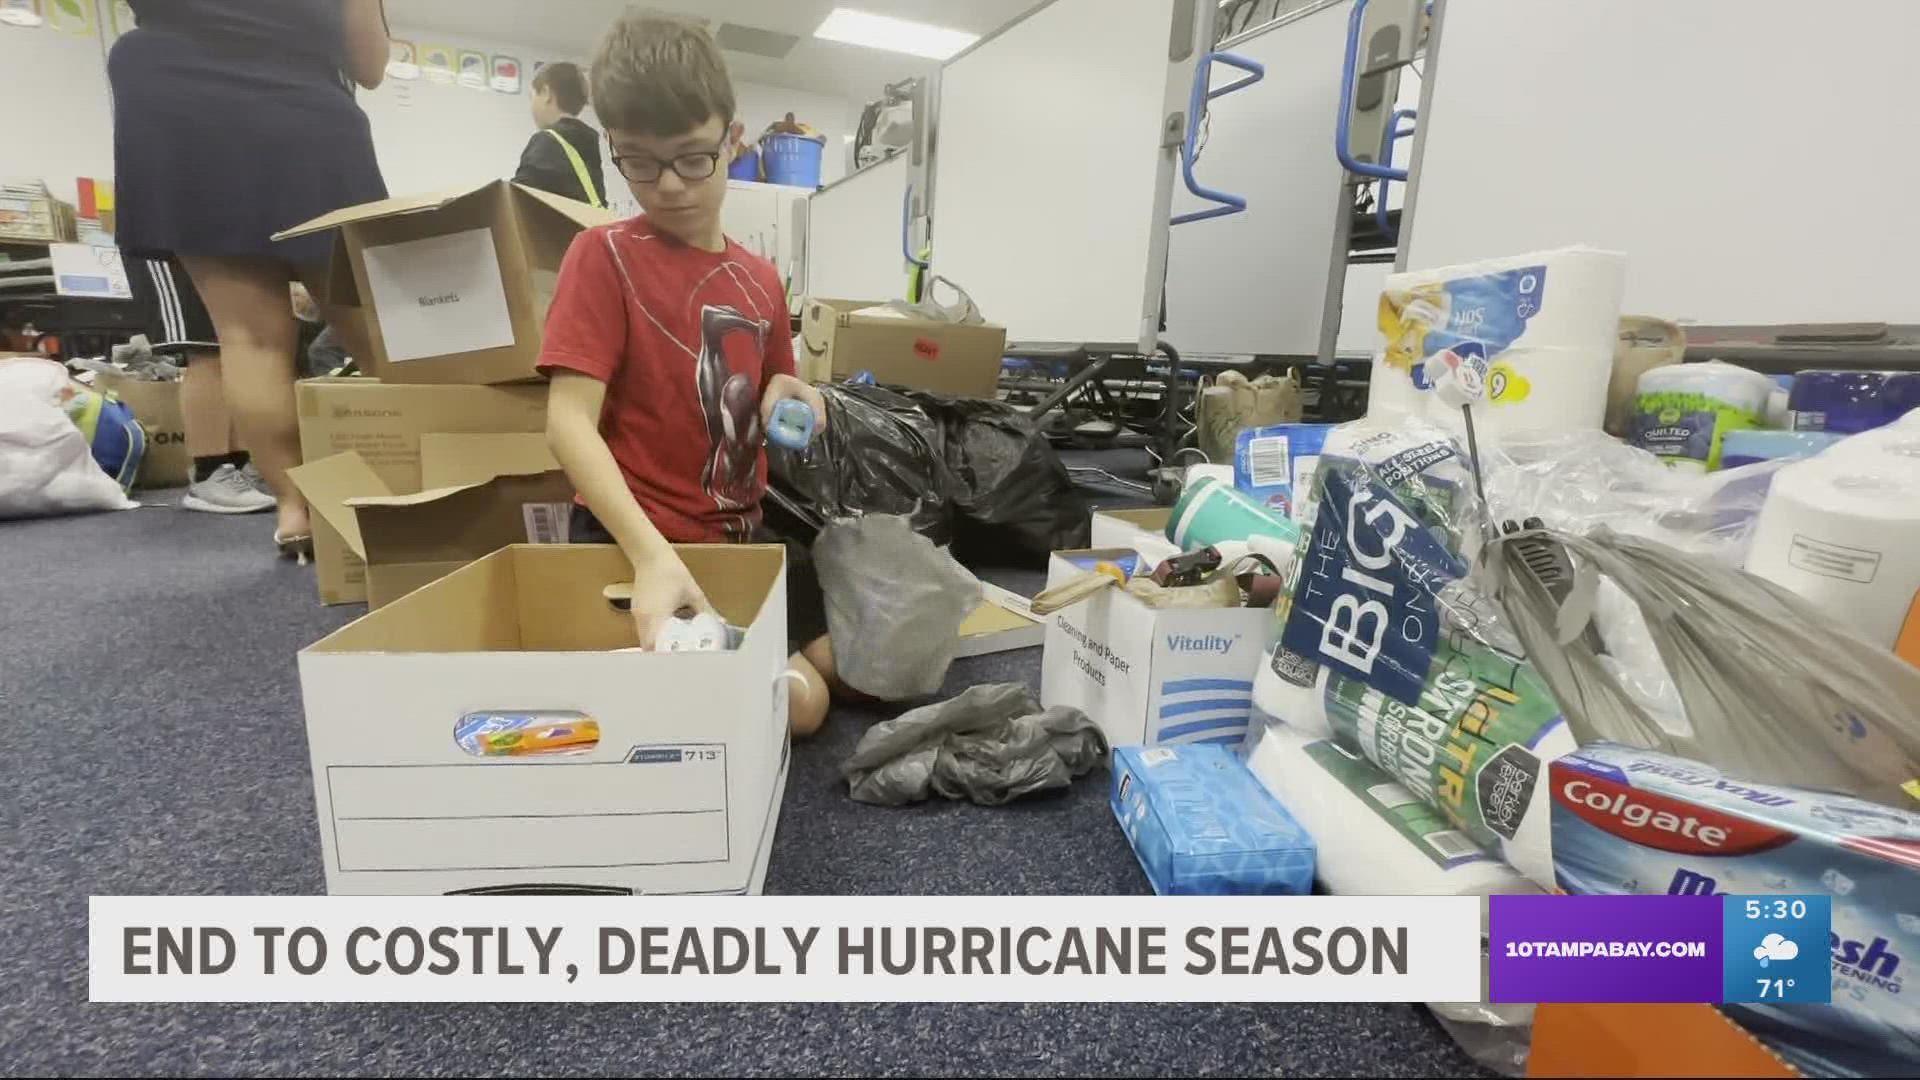 The 2022 hurricane season is expected to be among the costliest and deadliest on-record.